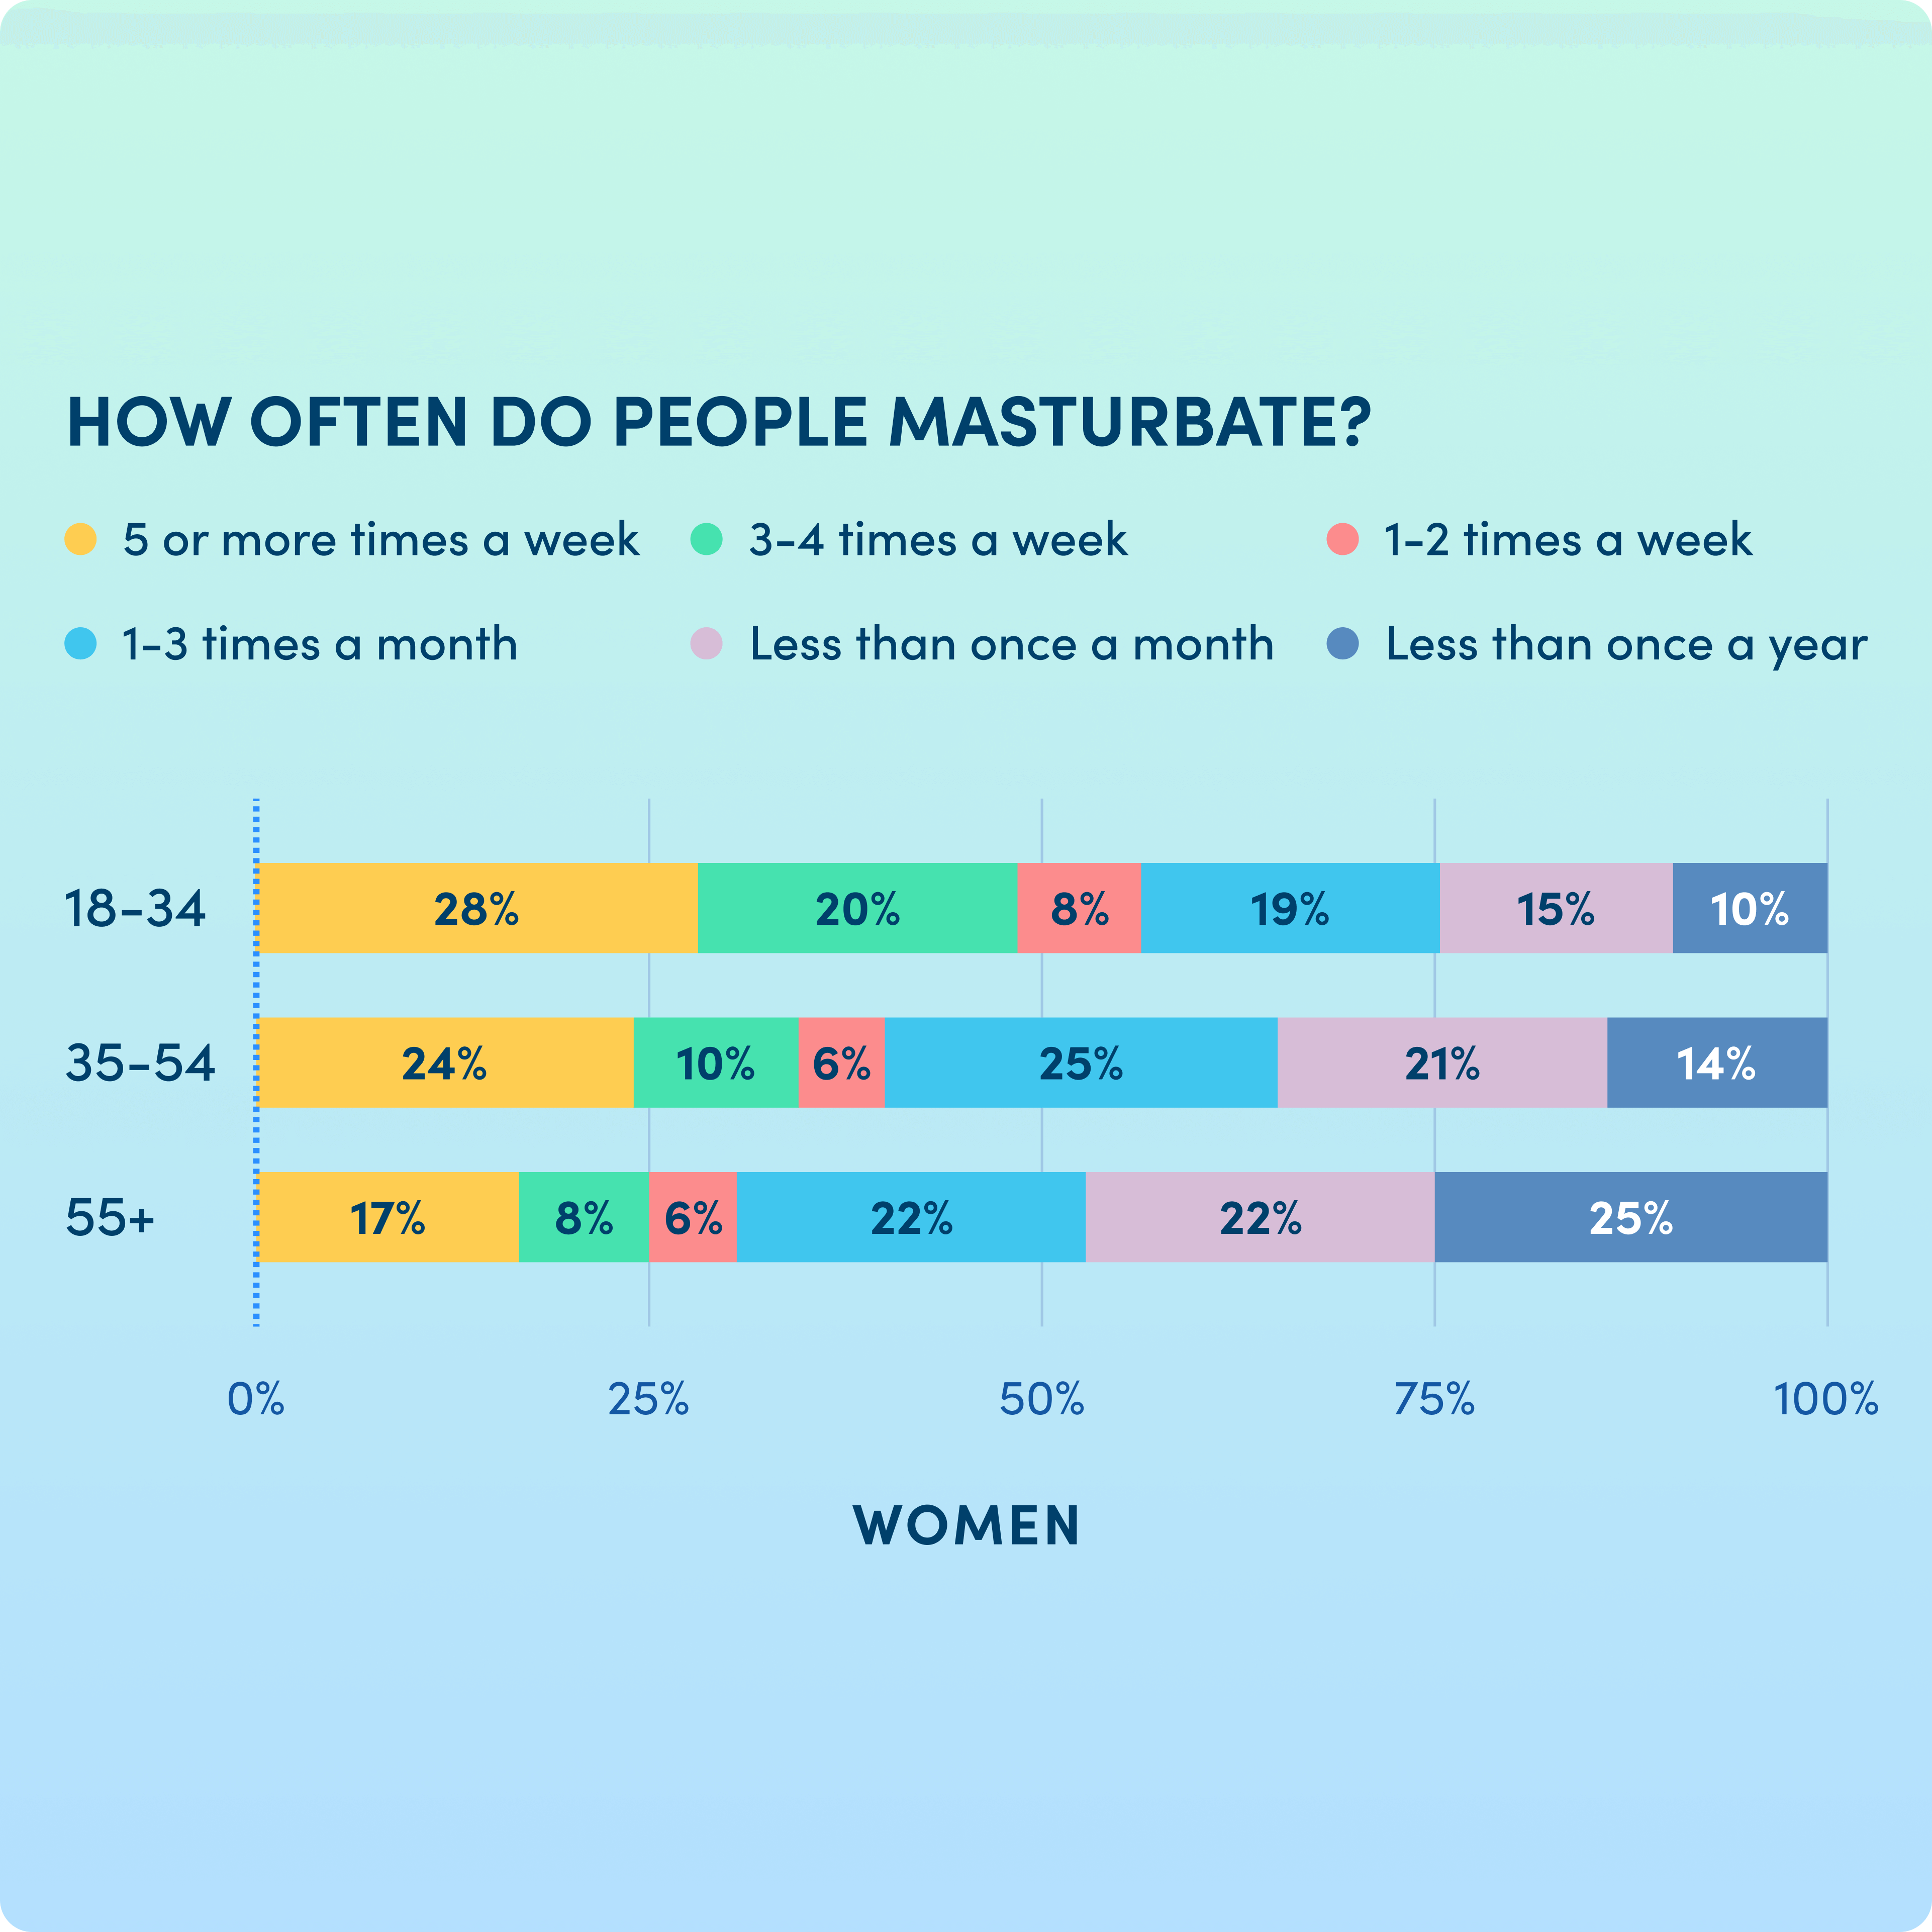 Fourth slide of an Instagram carousel post with bar charts of how often people masturbate